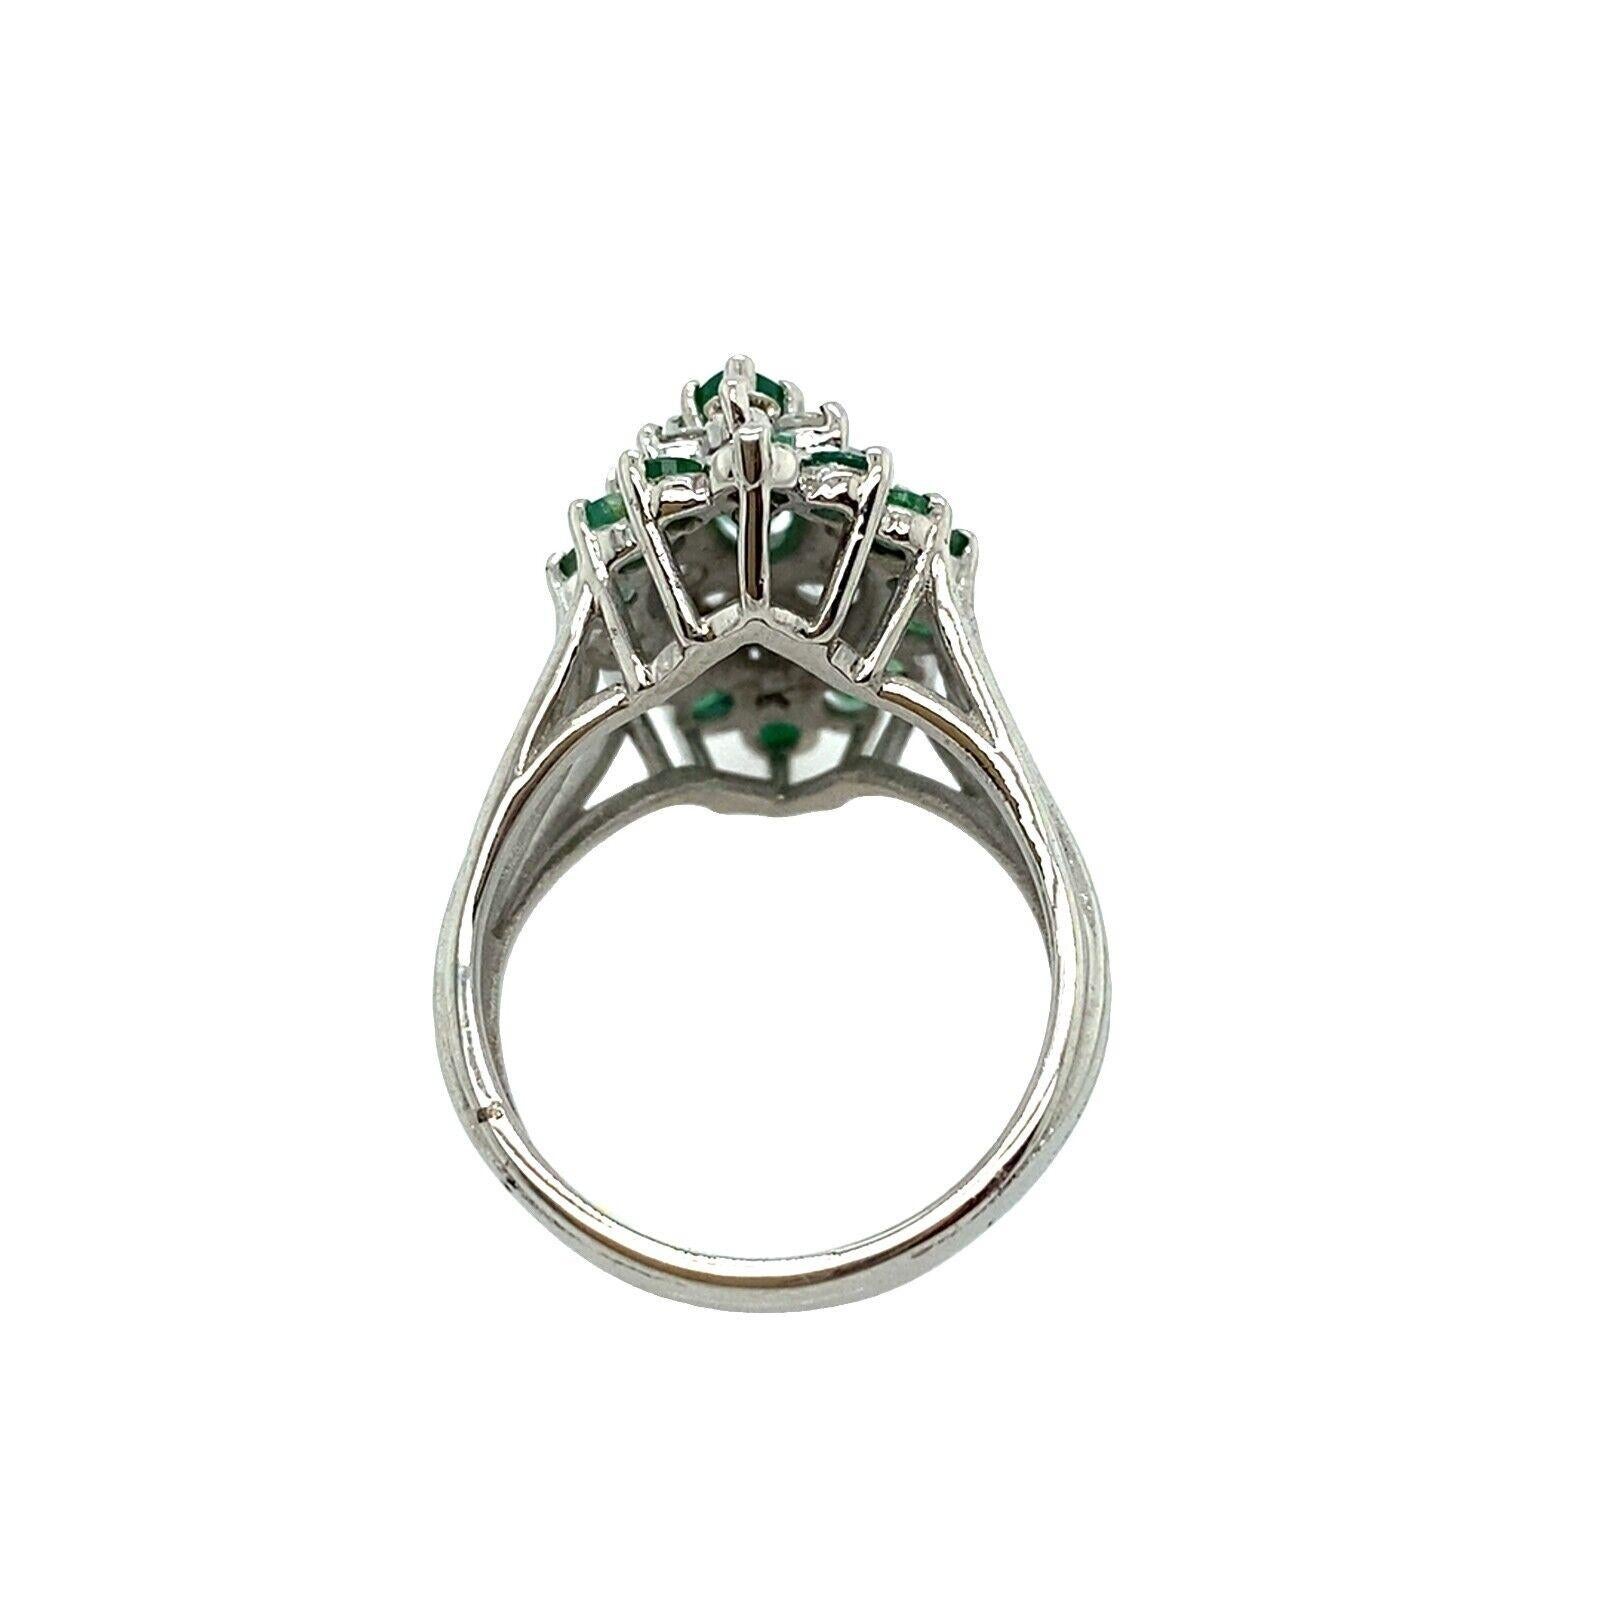 Round Cut Emerald & Diamonds Cluster Ring Set in 14ct White Gold